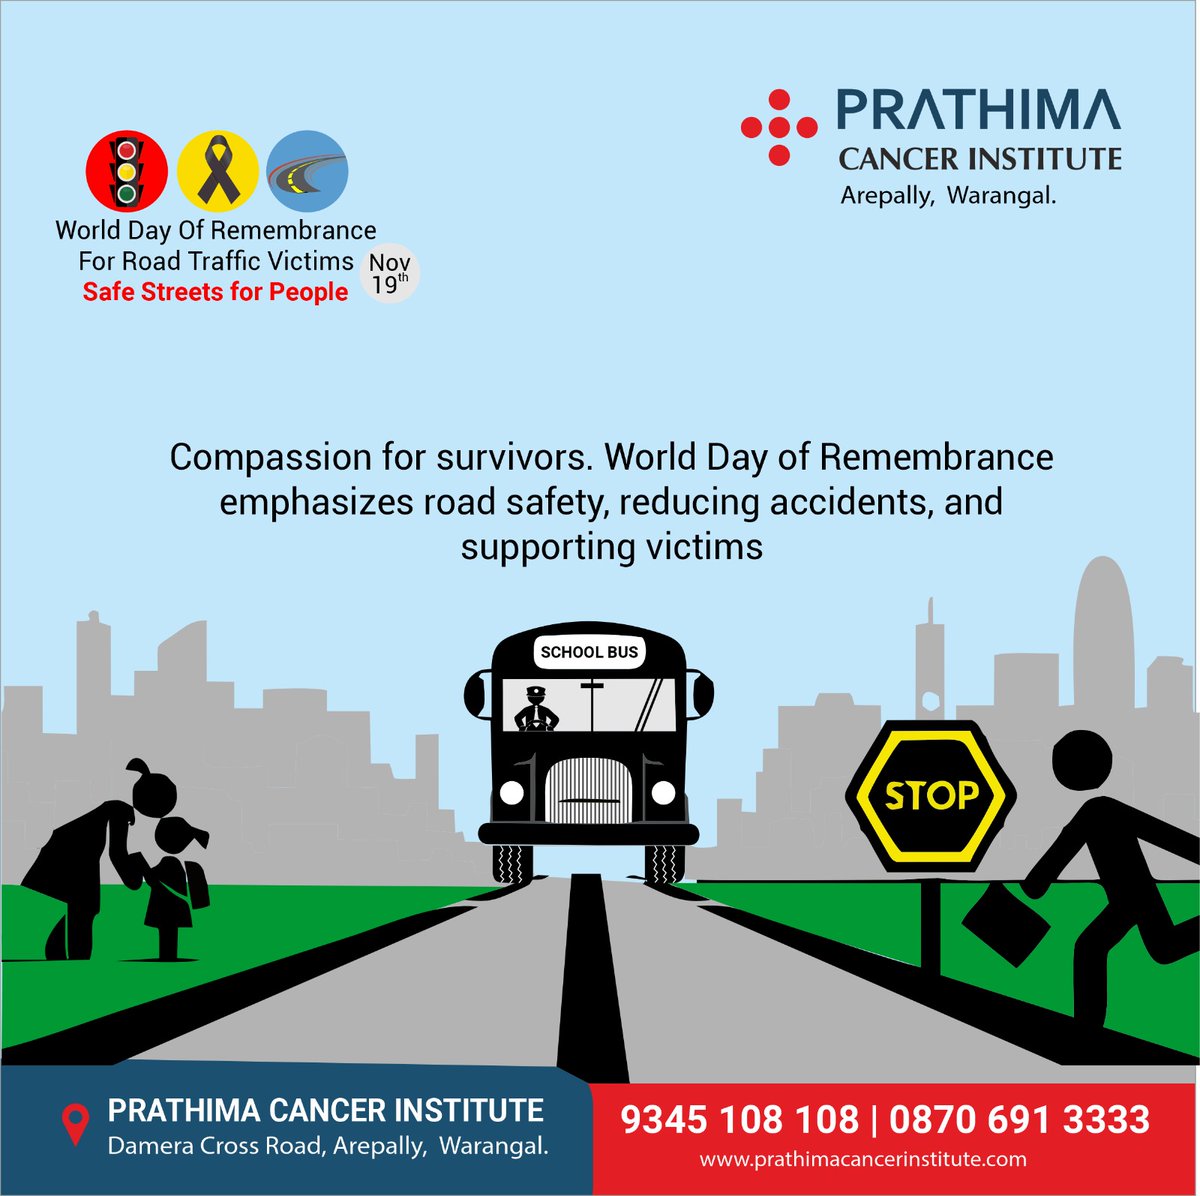 Compassion for survivors. World Day of Remembrance emphasizes road safety, reducing accidents, and supporting victims.

#RoadSafetyRemembrance #RememberingRoadVictims #RoadSafetyAwareness #RoadSafetyMatters #InMemoryOfRoadVictims  #trendingnow #prathimacancerinstitute #PCI